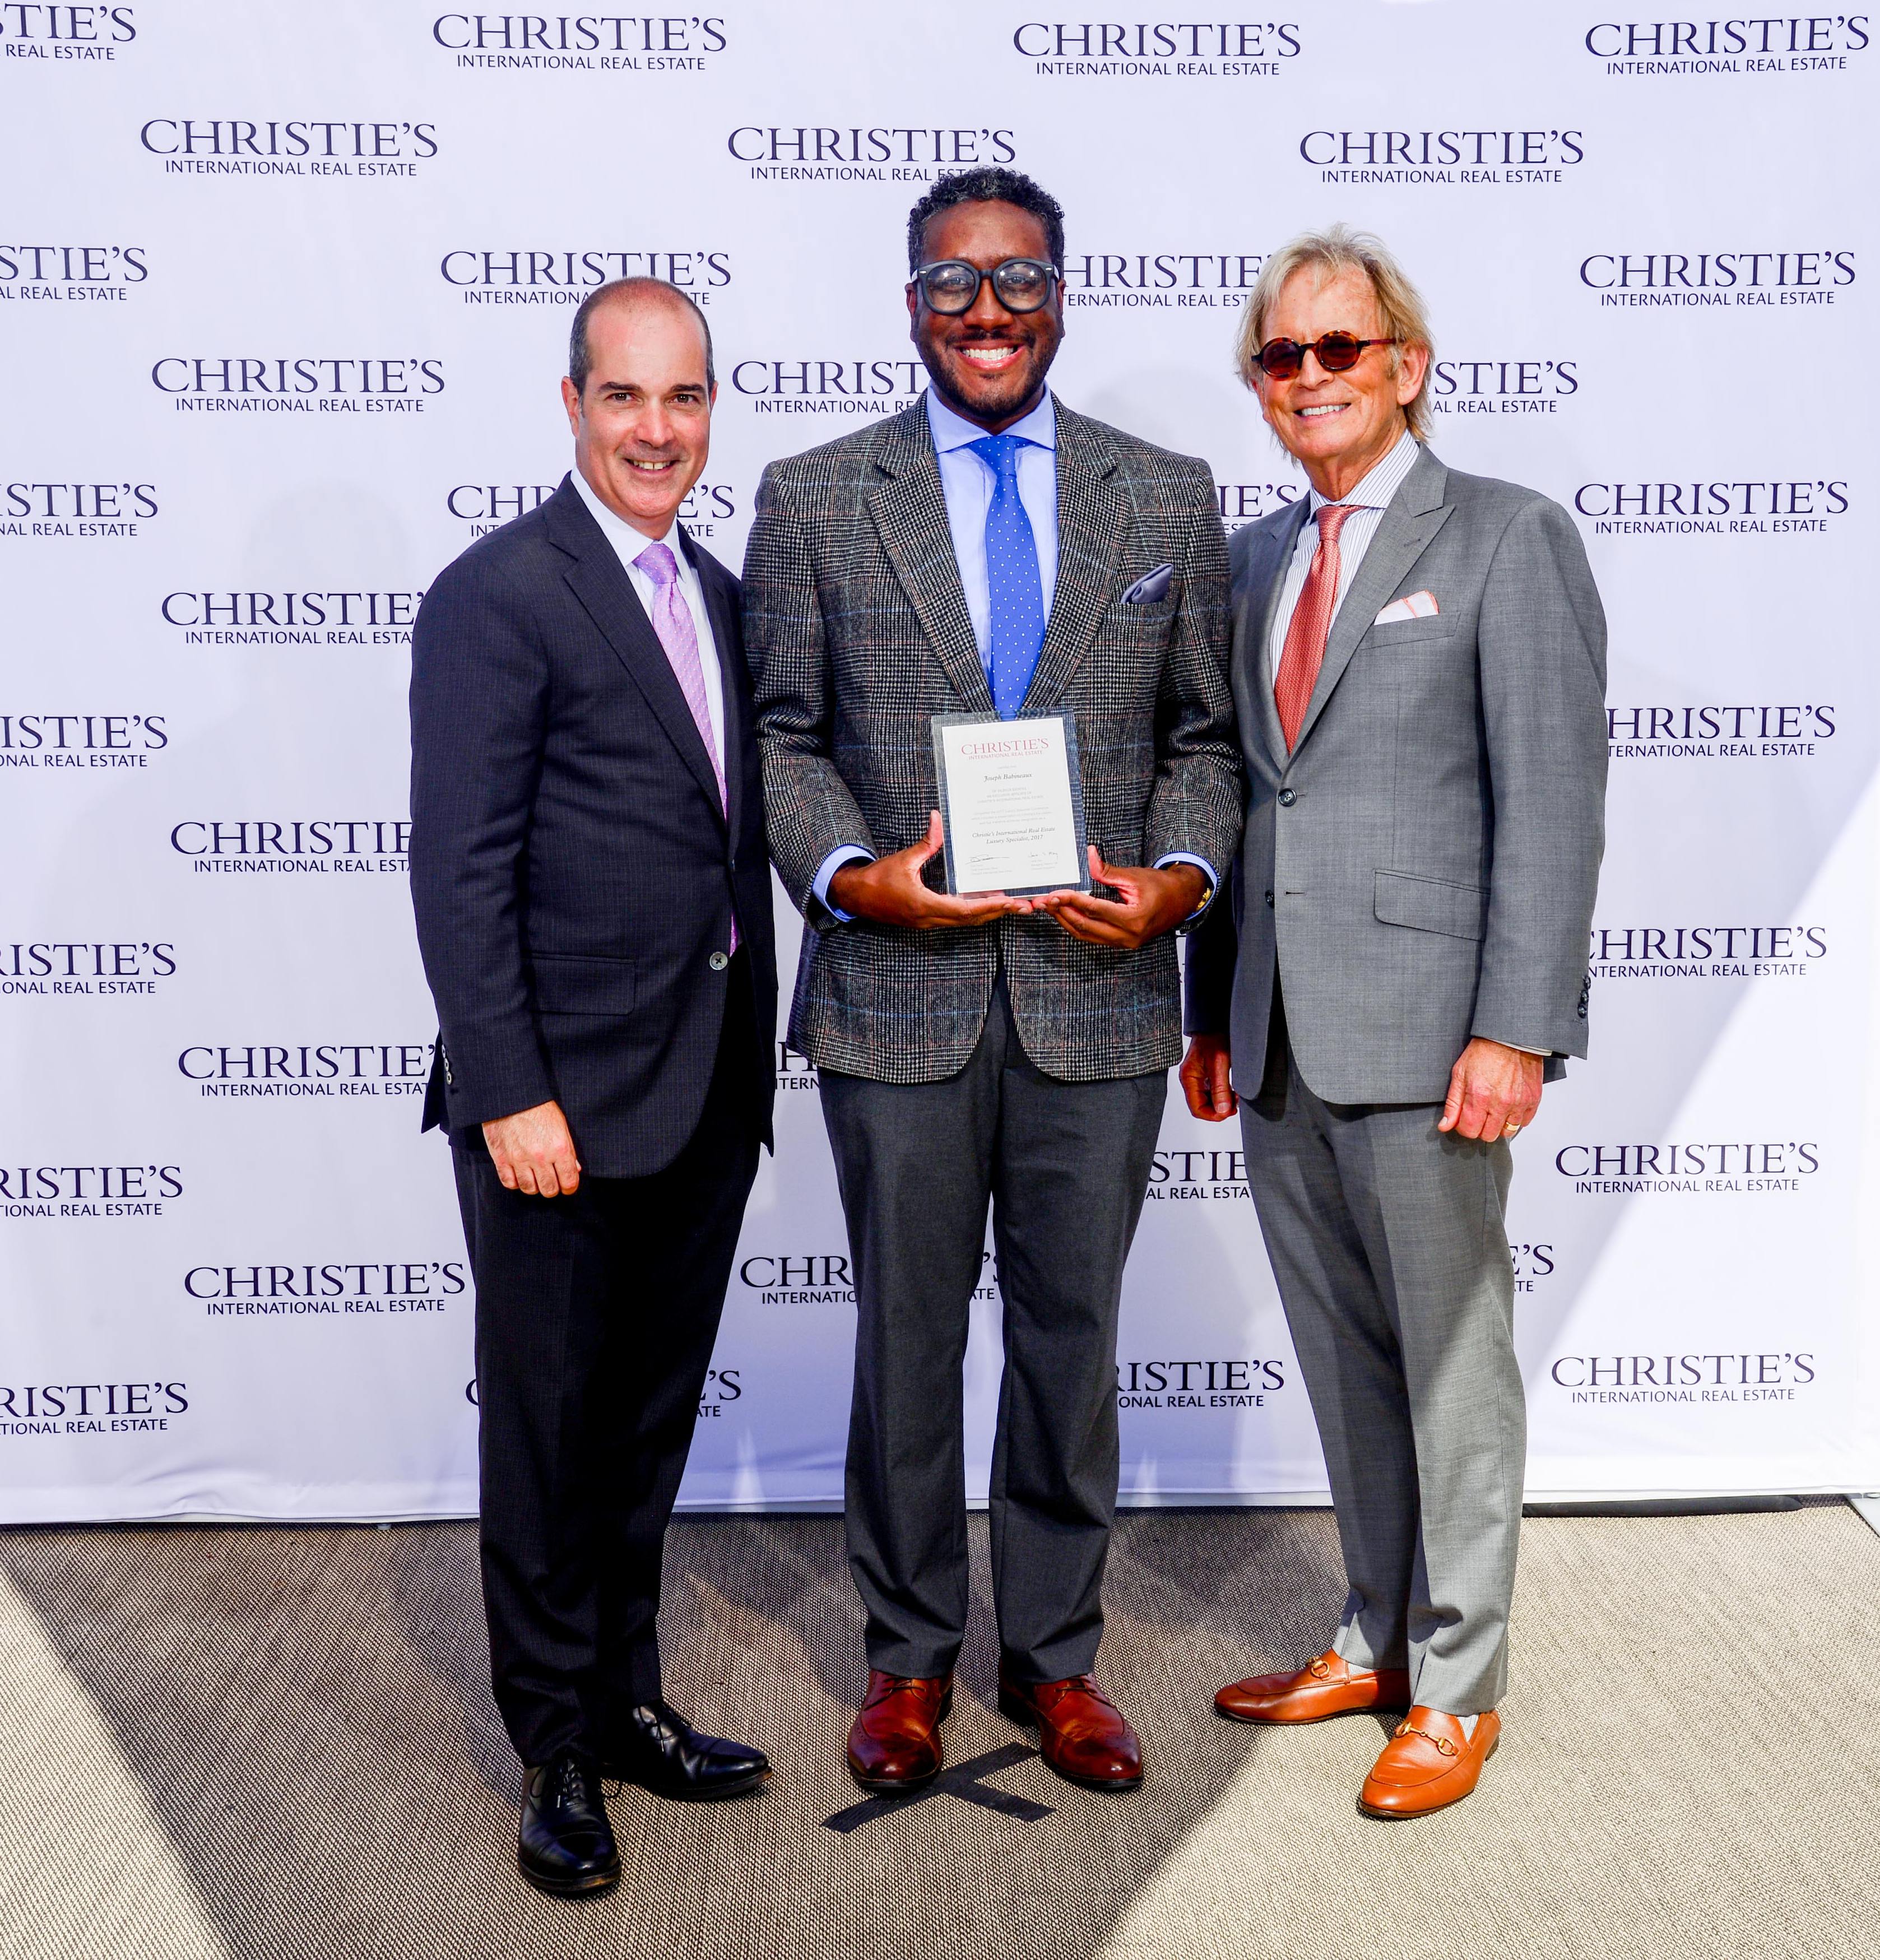 (L-R): Dan Conn, CEO of Christie's International Real Estate, Joseph Babineaux of Dilbeck Estates, and Zackary Wright, Executive Director of Christie's International Real Estate